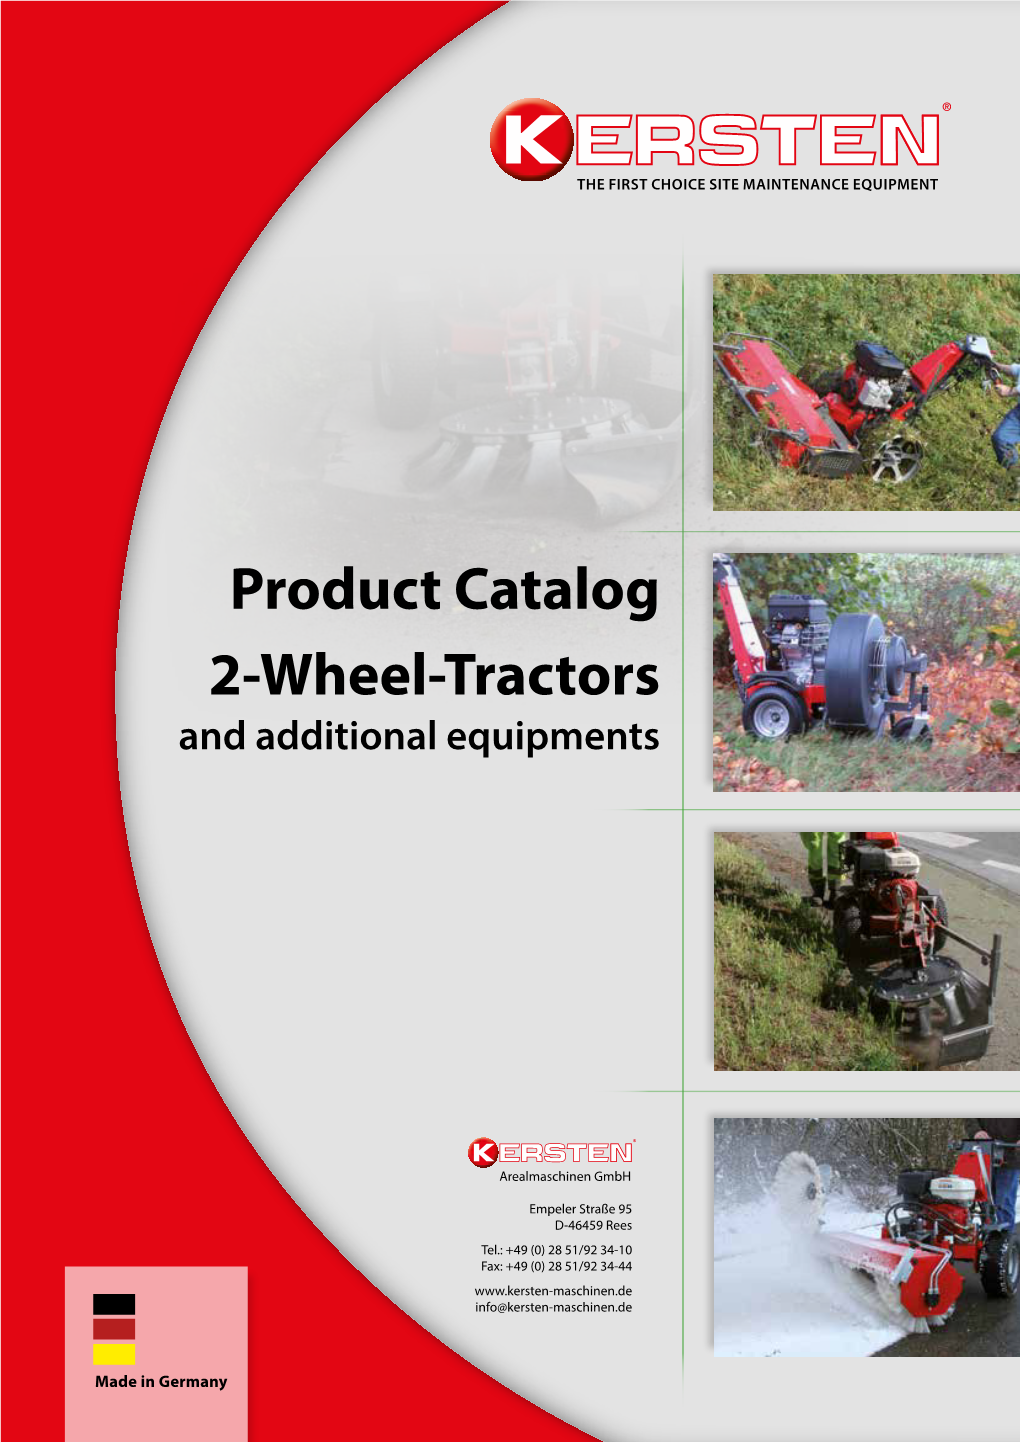 Product Catalog 2-Wheel-Tractors and Additional Equipments